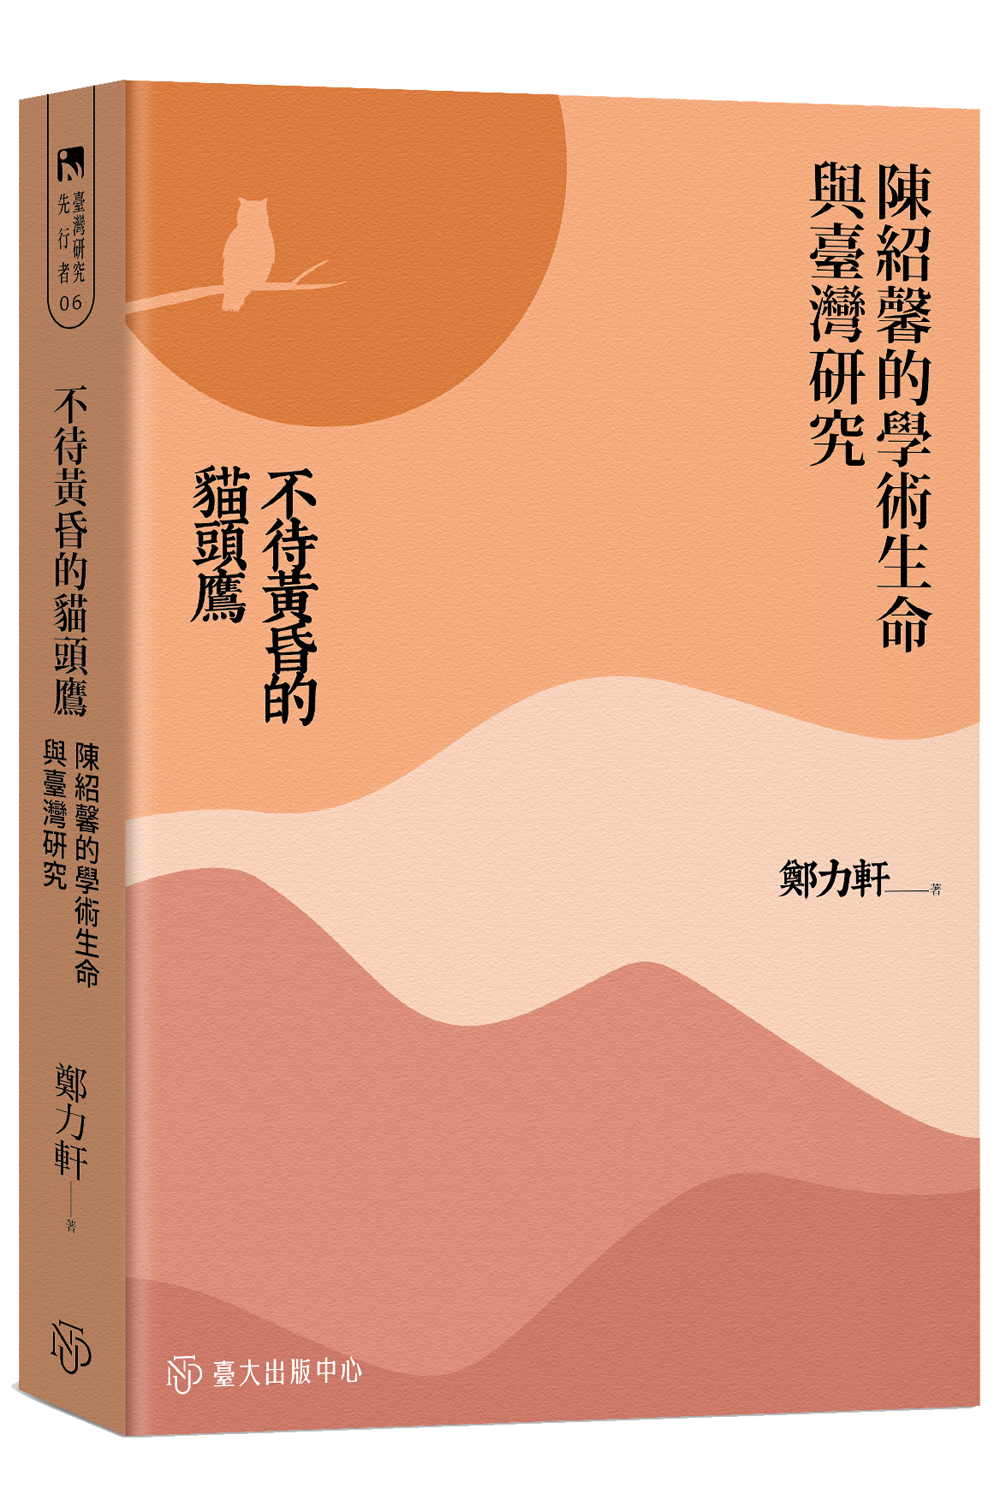 The Owl That Did Not Wait Till Dusk: The Intellectual Life of Chen Shao-hsing and Taiwan Studies